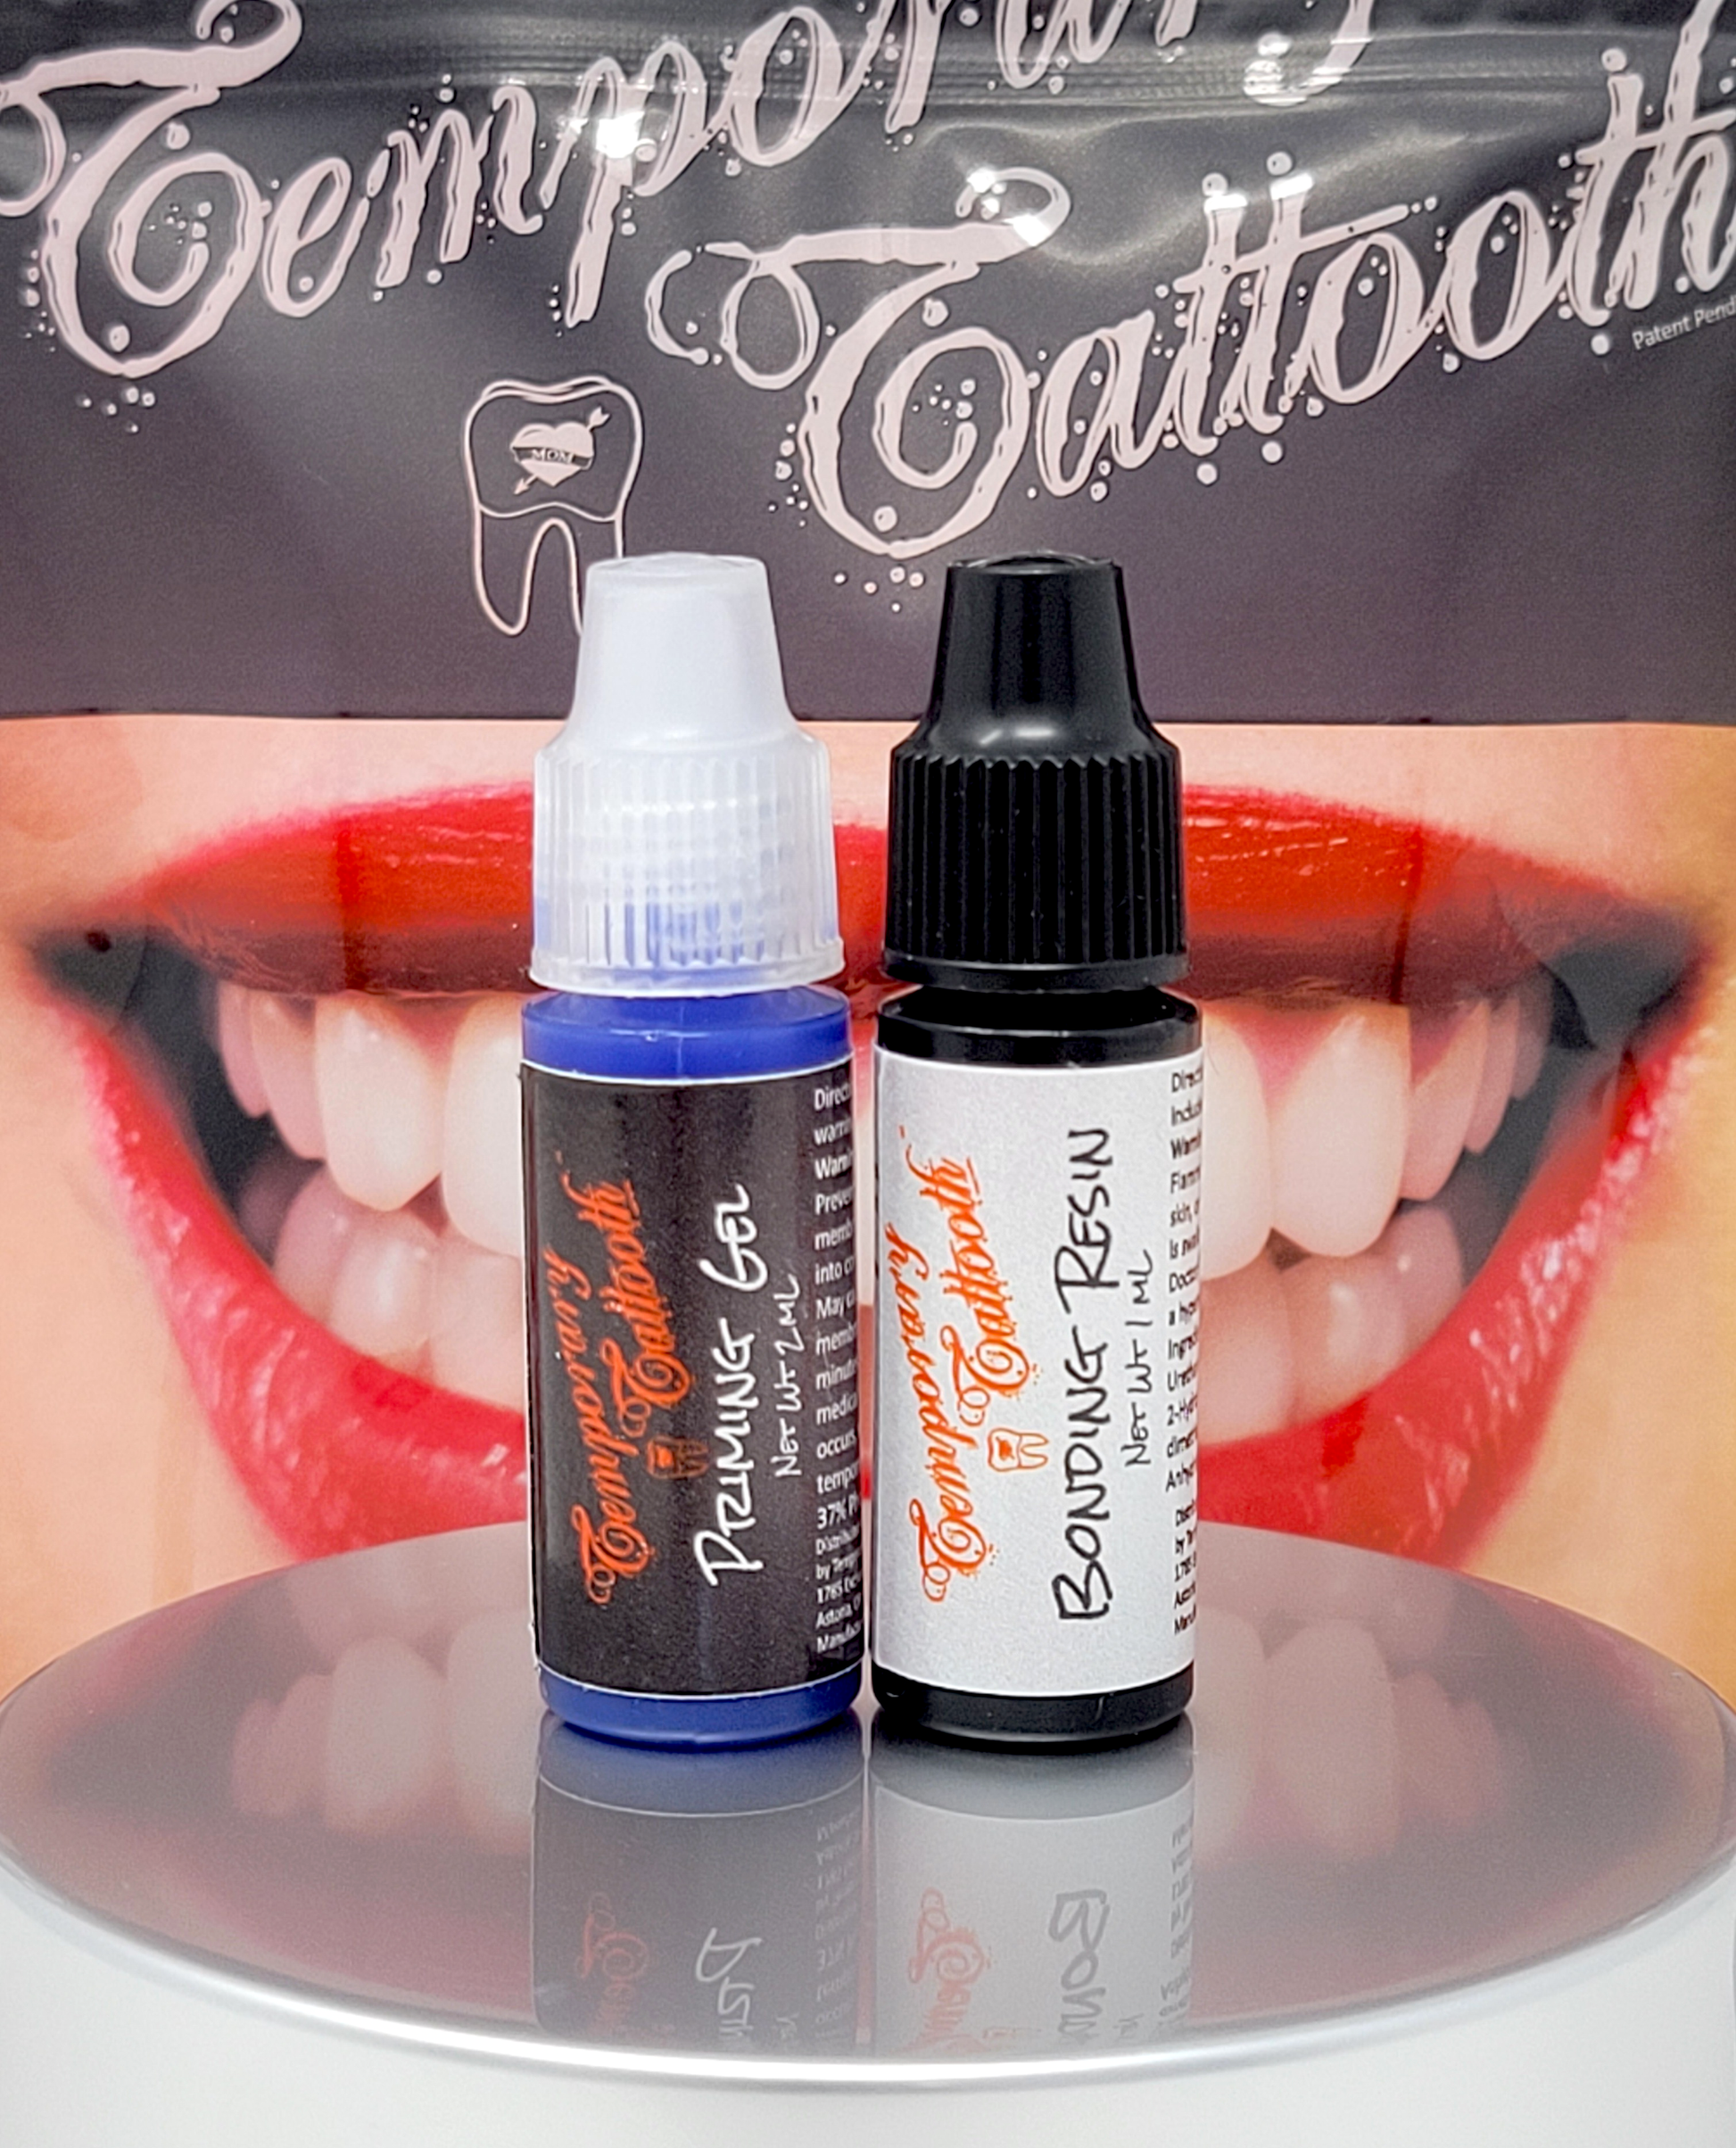 An alternate photograph of Temporary Tattooth Priming gel on the left and Temporary Tattooth Bonding Resin on the right.  These are products used to apply Temporary Tooth Tattoos.